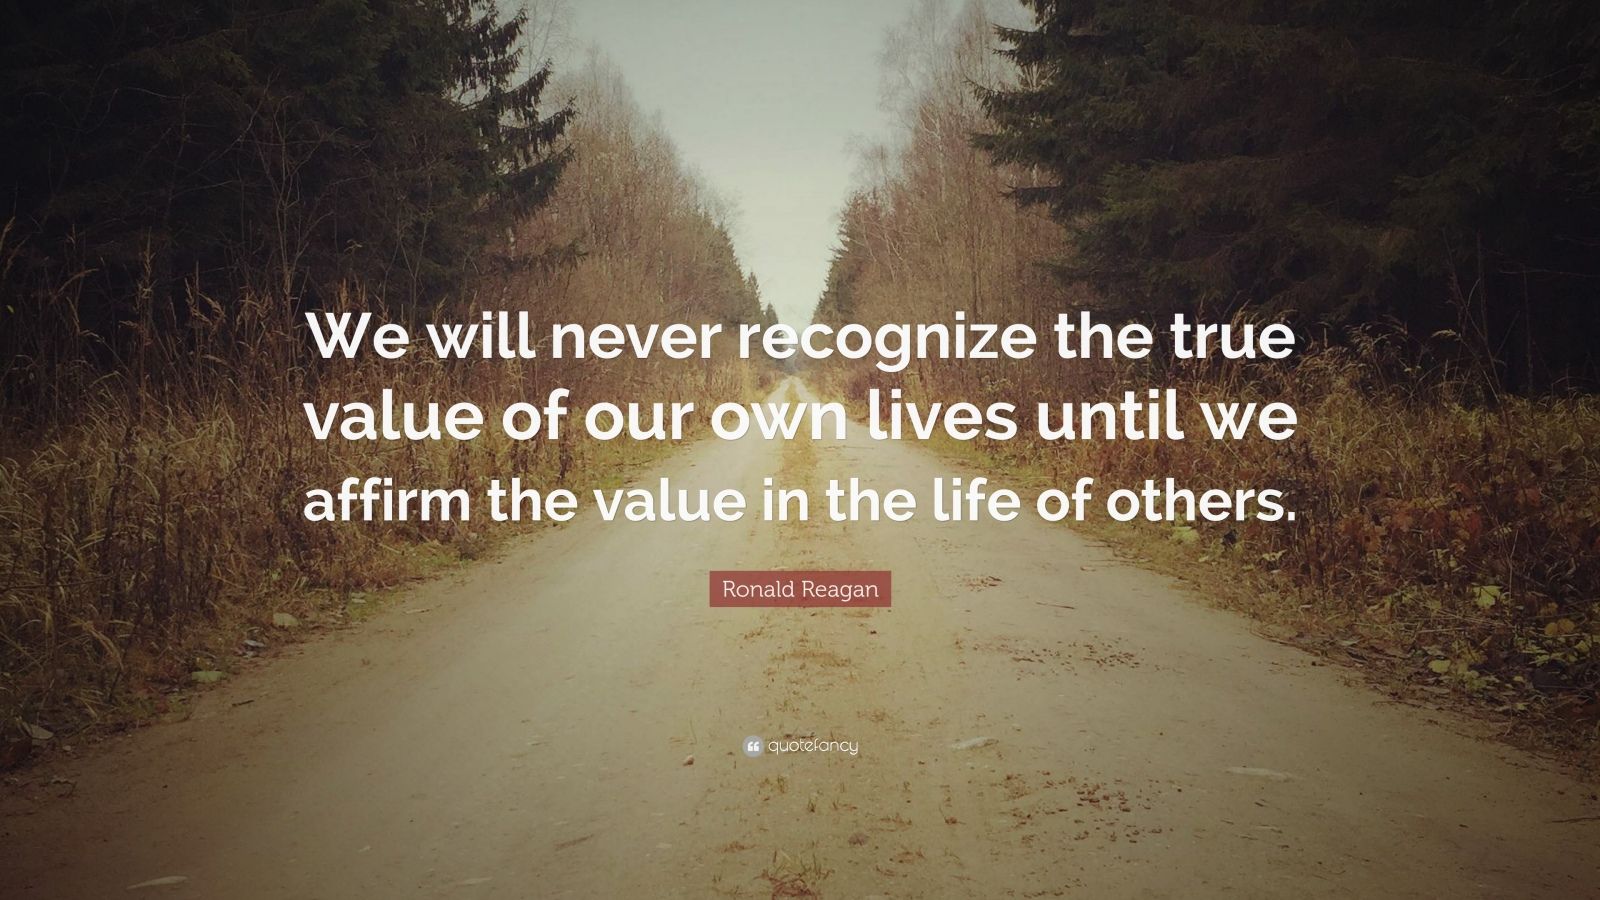 Ronald Reagan Quote: “We will never recognize the true value of our own ...